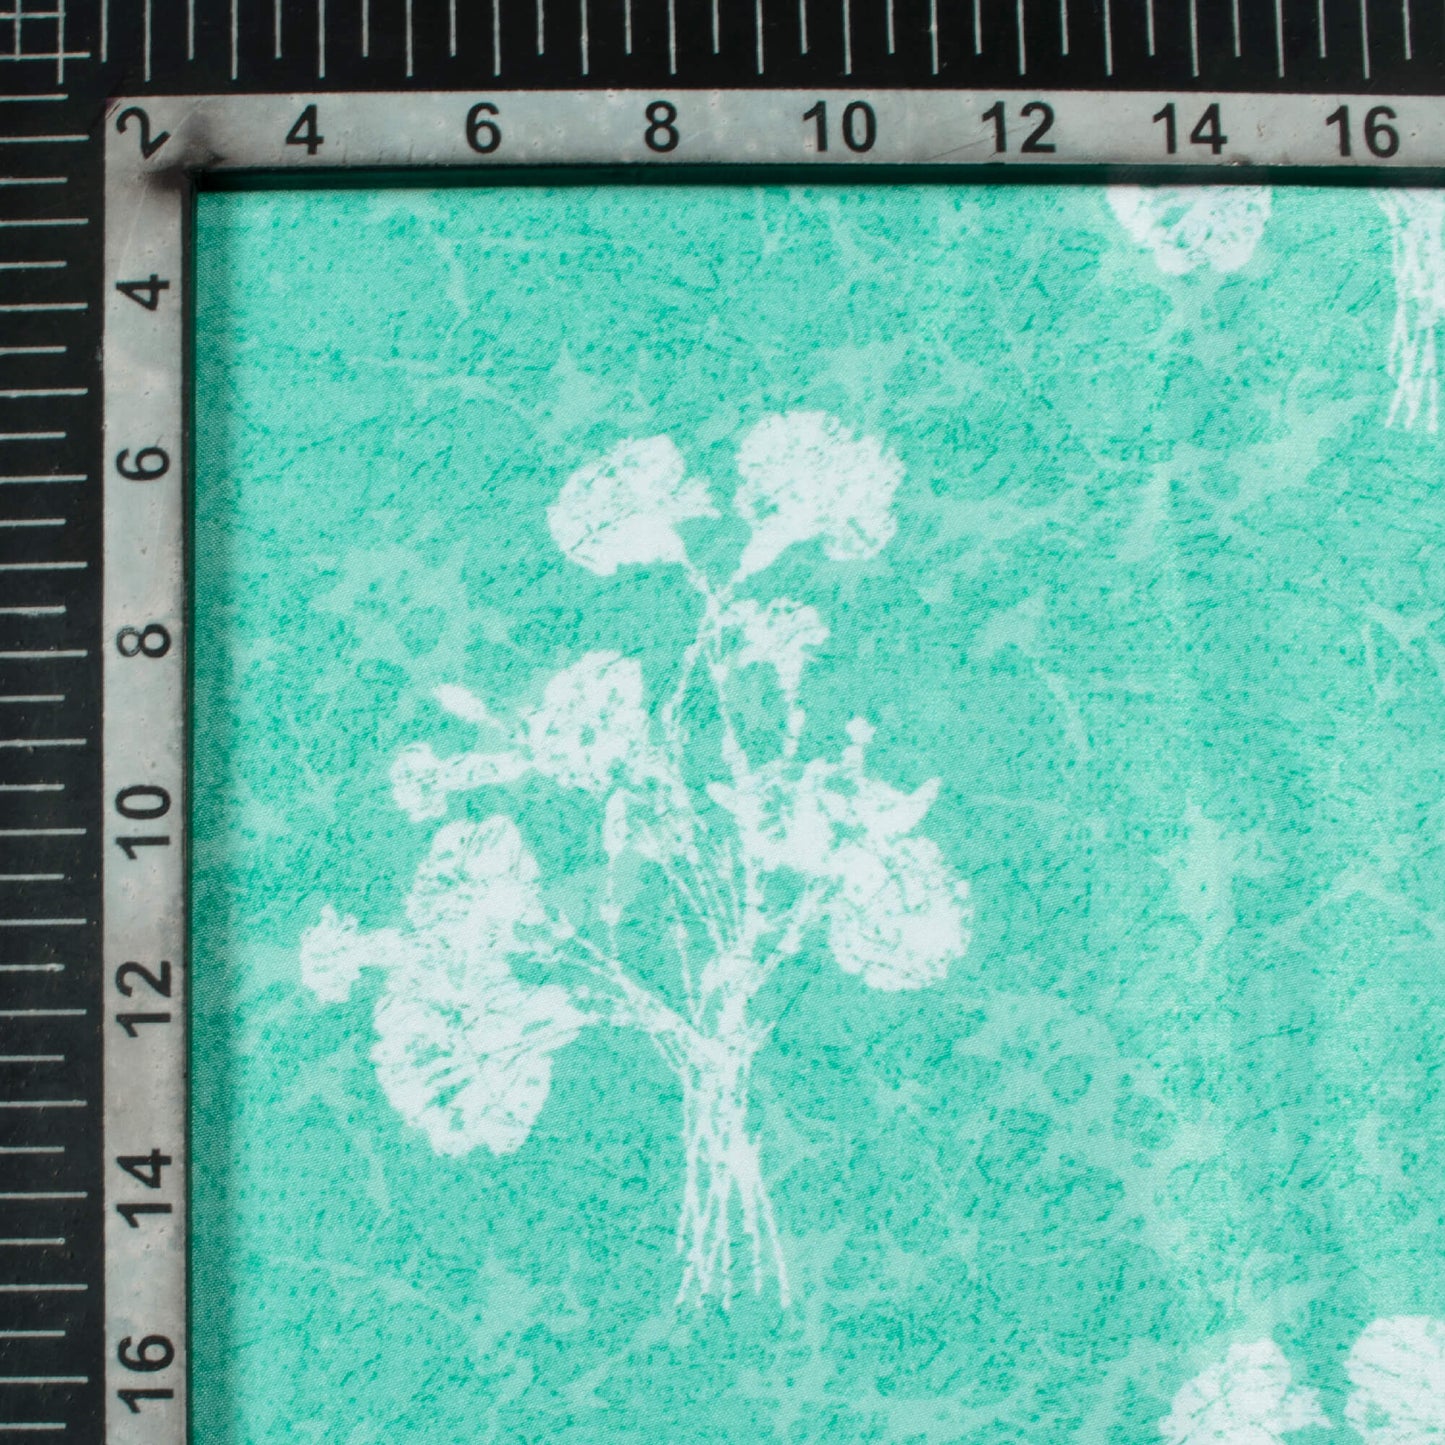 Mint Green And White Floral Pattern Digital Print Crepe Silk Fabric